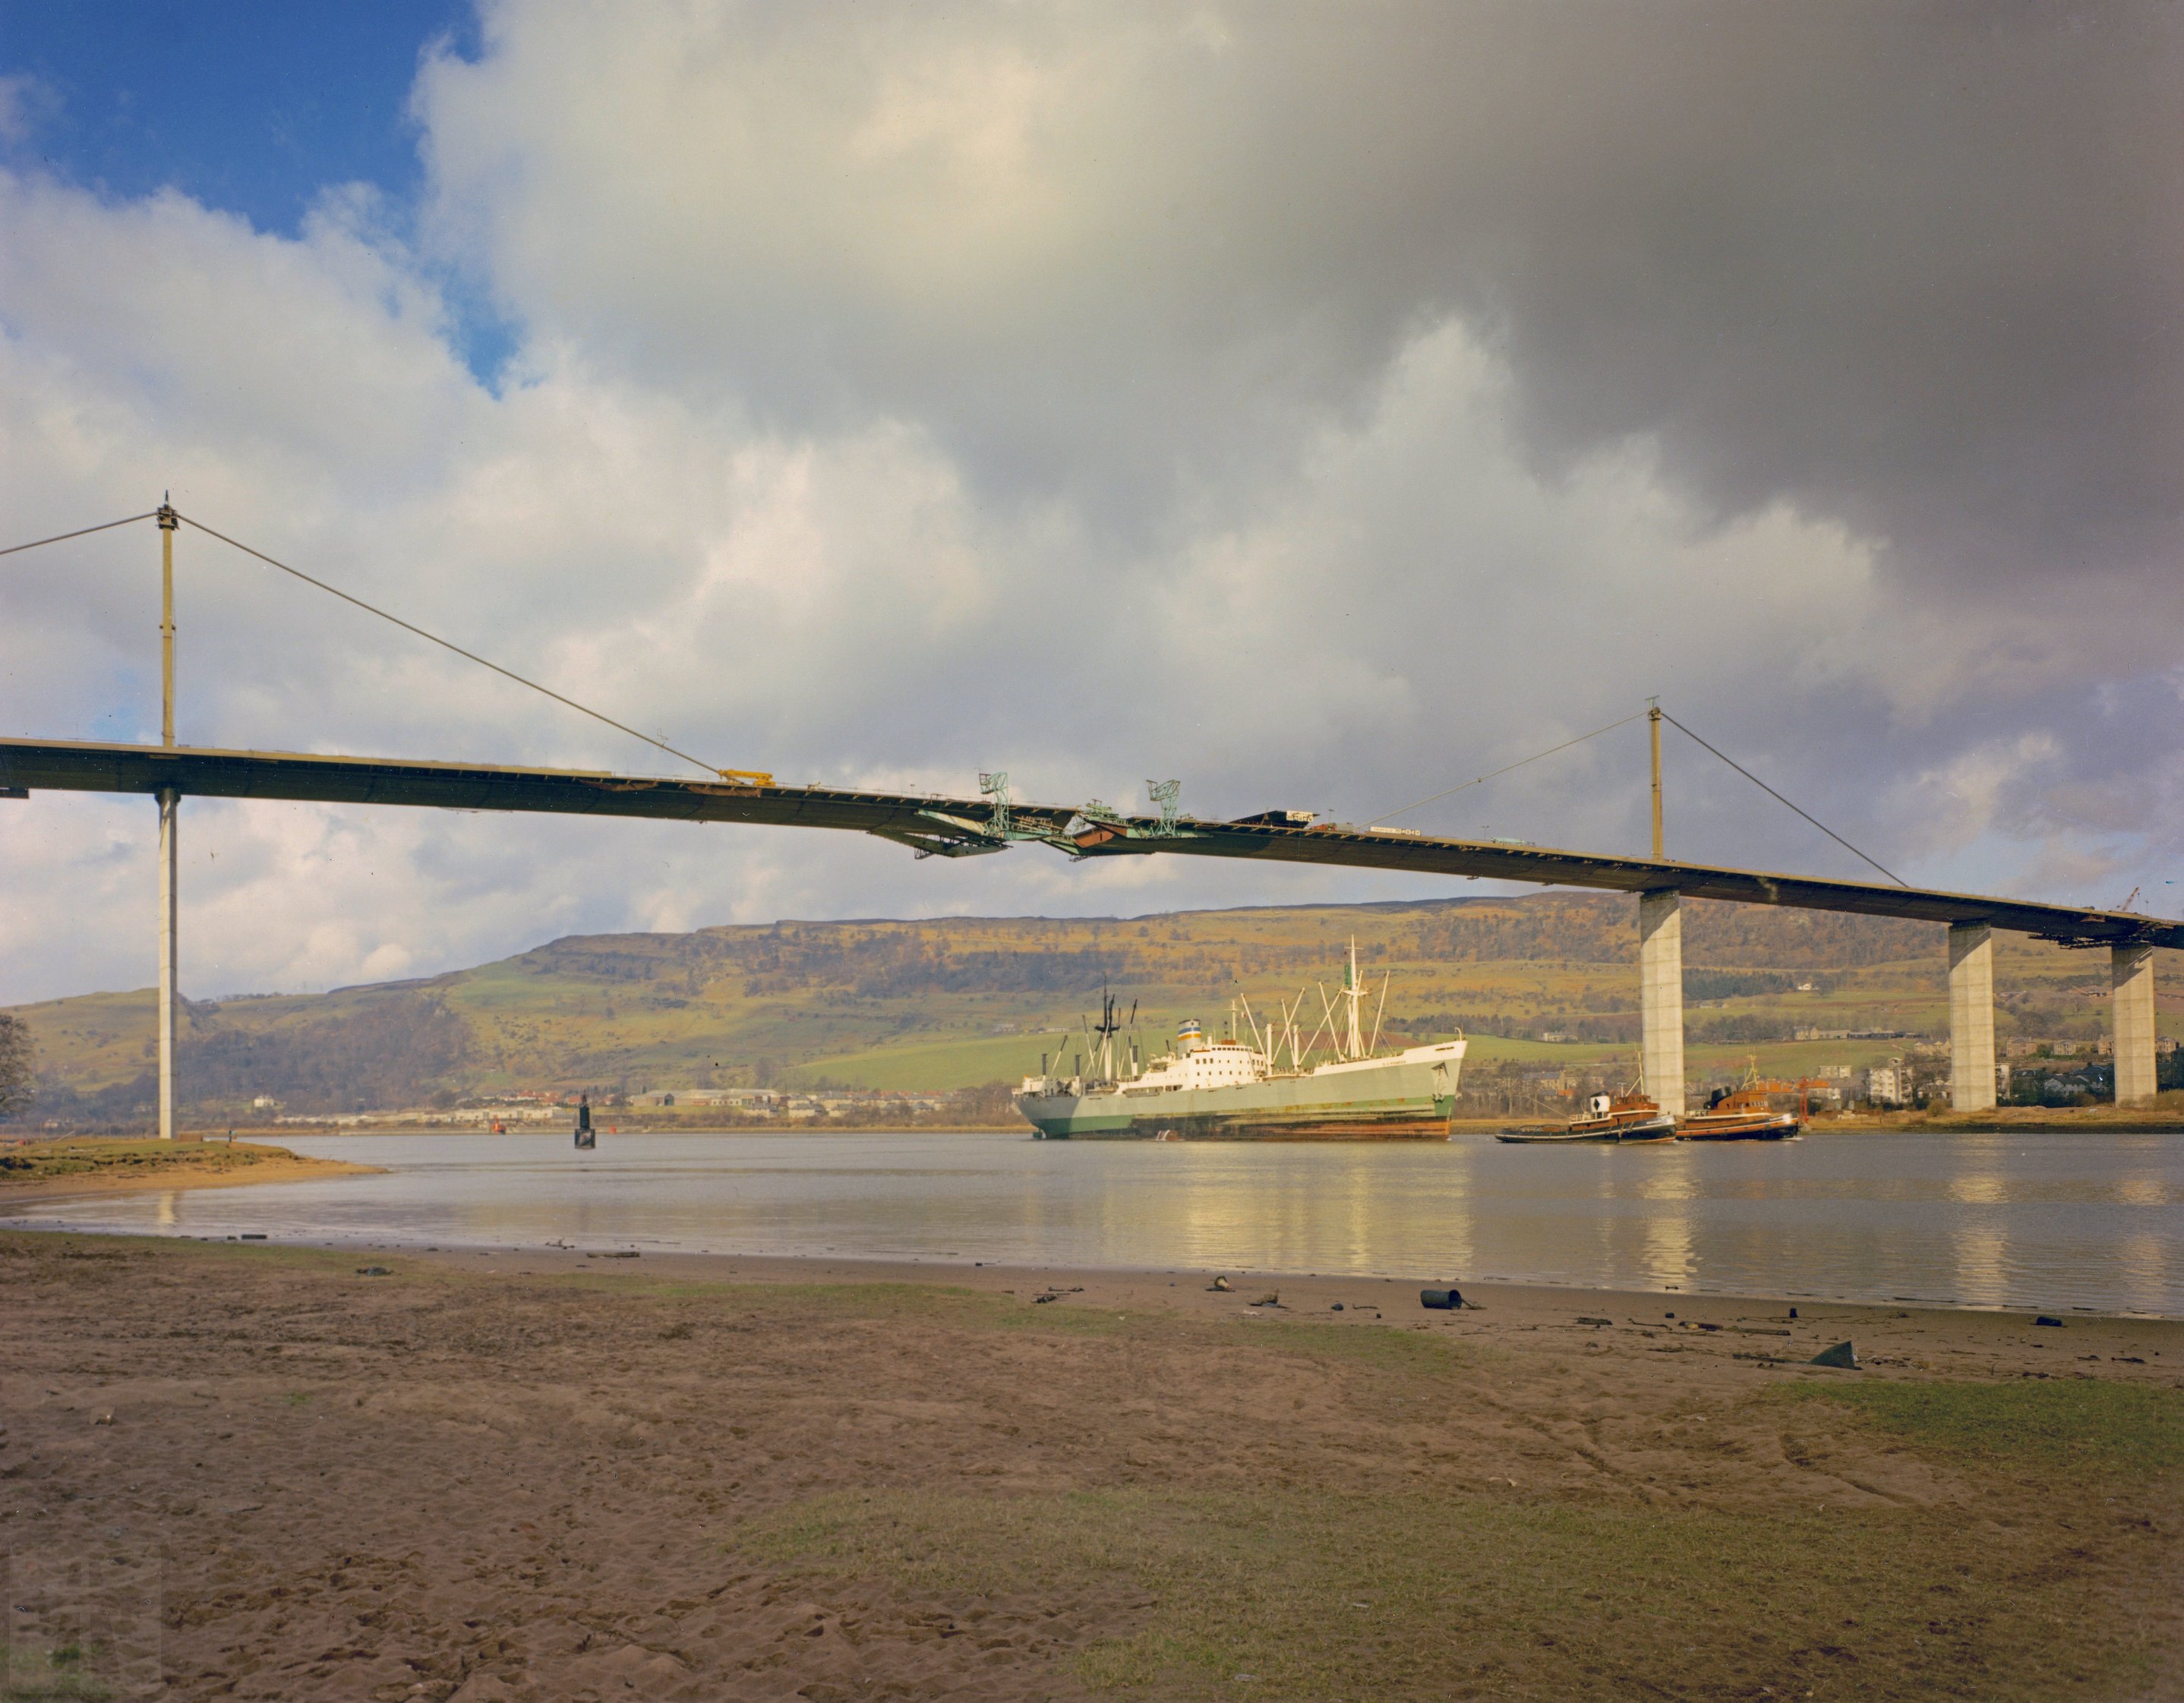 Construction of the bridge deck of the Erskine Bridge is completed in 1971.